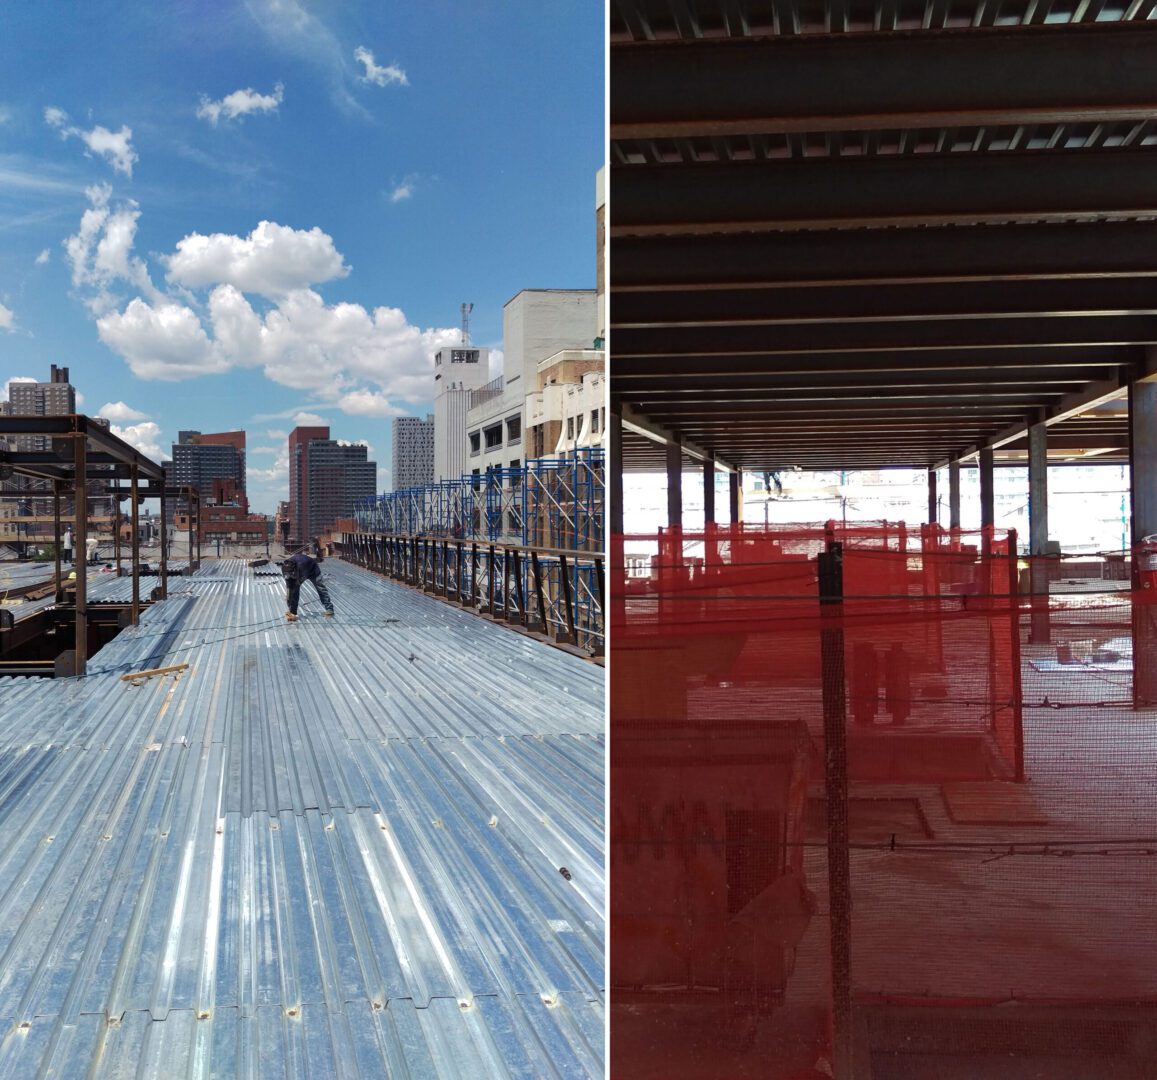 Two pictures of a construction site with a red roof.